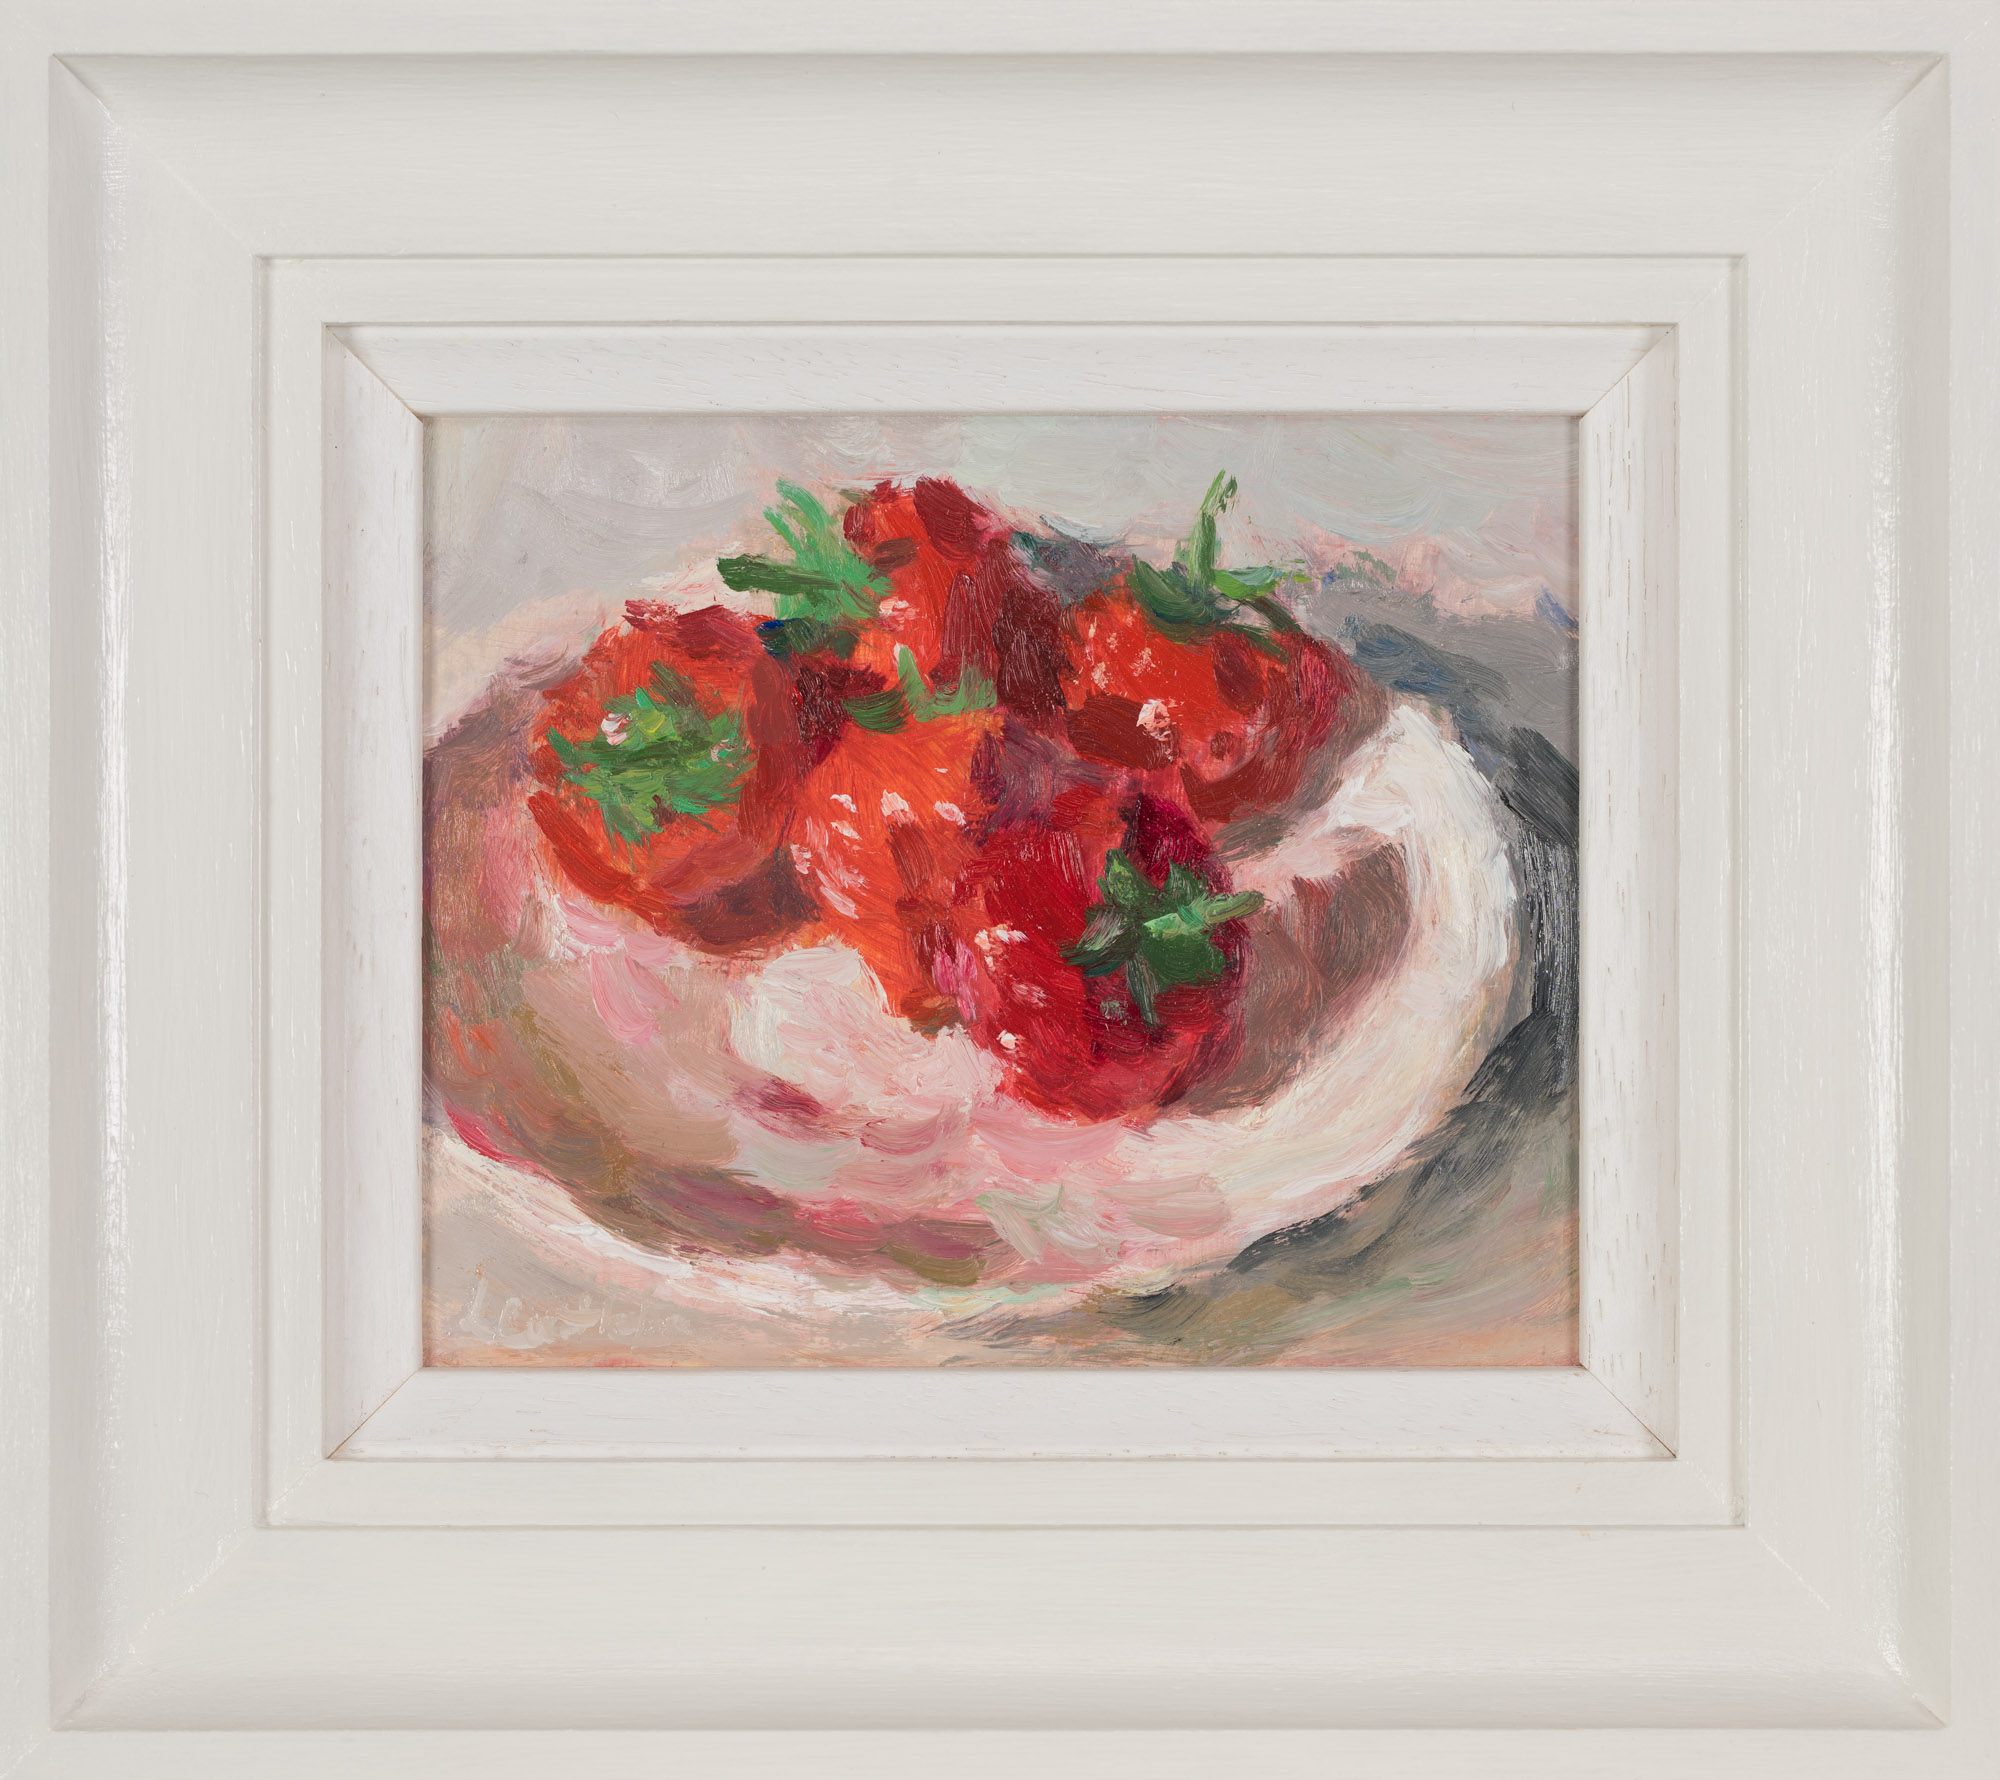 Strawberries in a Saucer 2